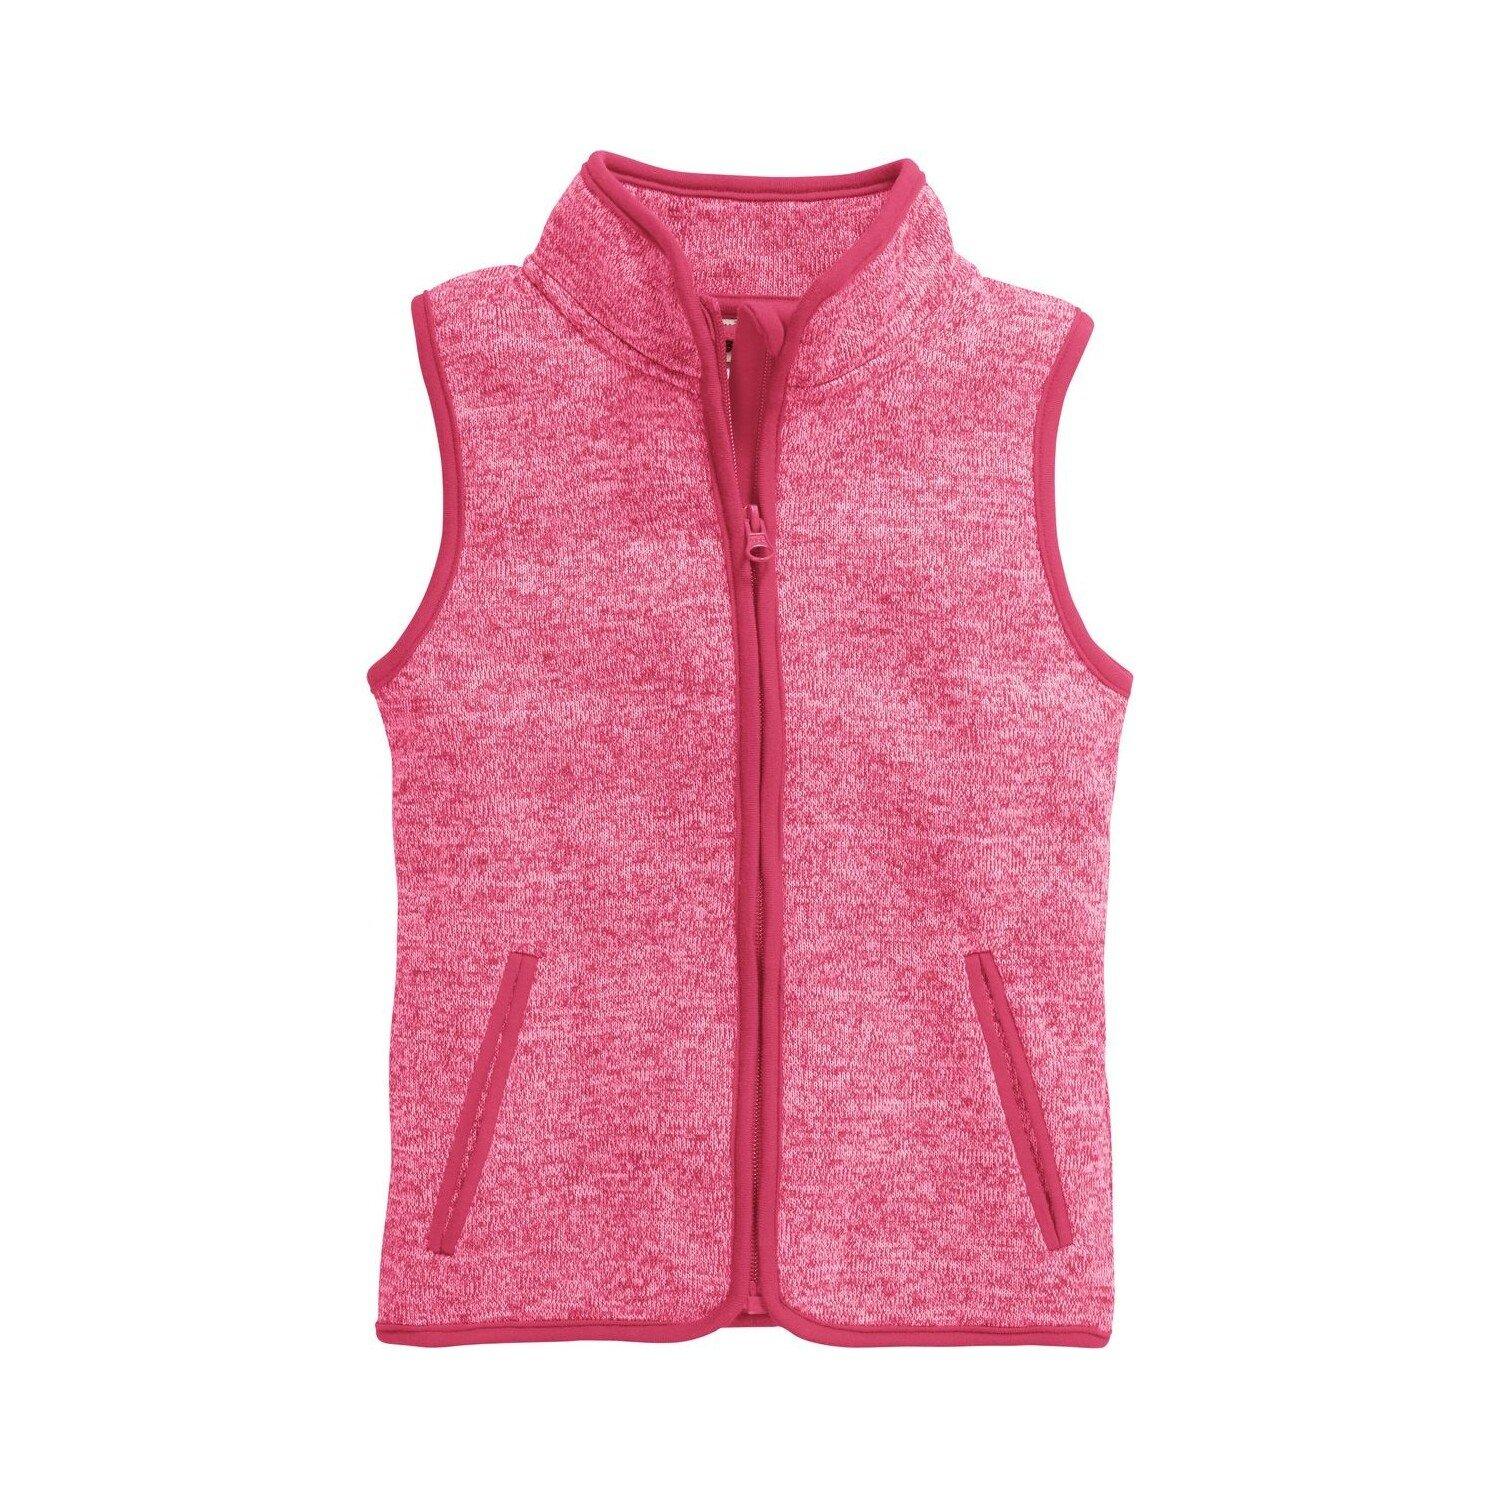 Playshoes  Gilet in pile per bambino Playshoes 